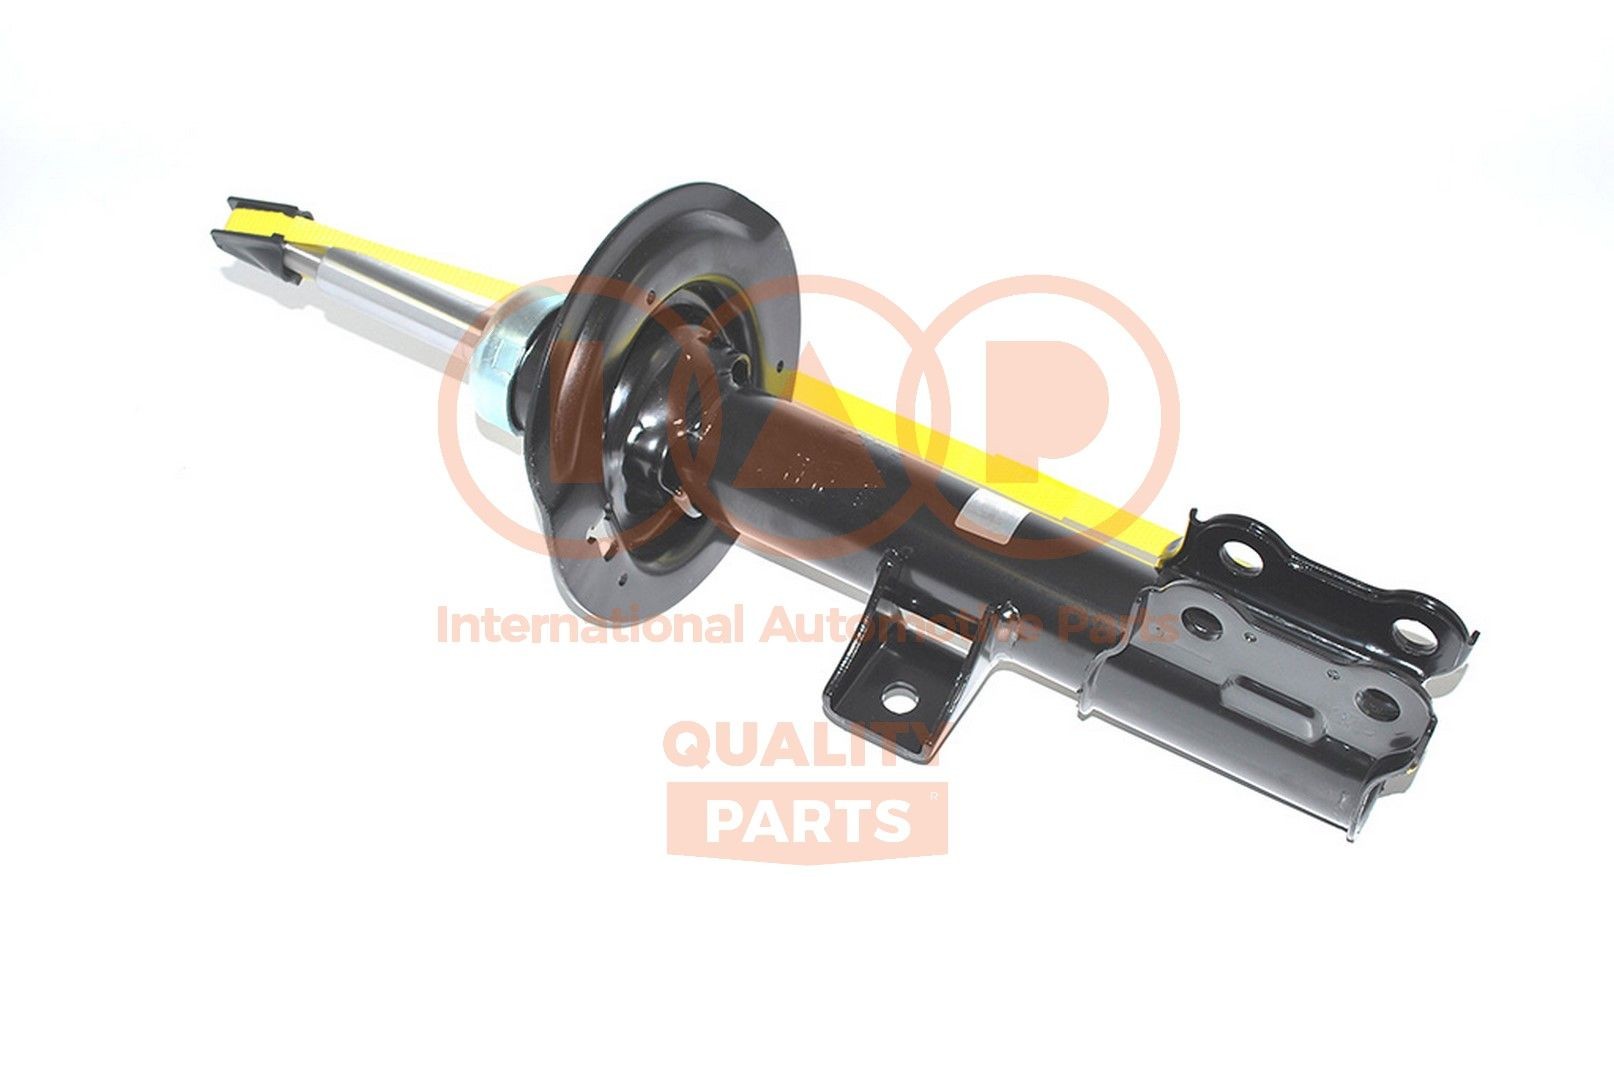 IAP QUALITY PARTS 504-07005 Shock absorber 54651-2S000